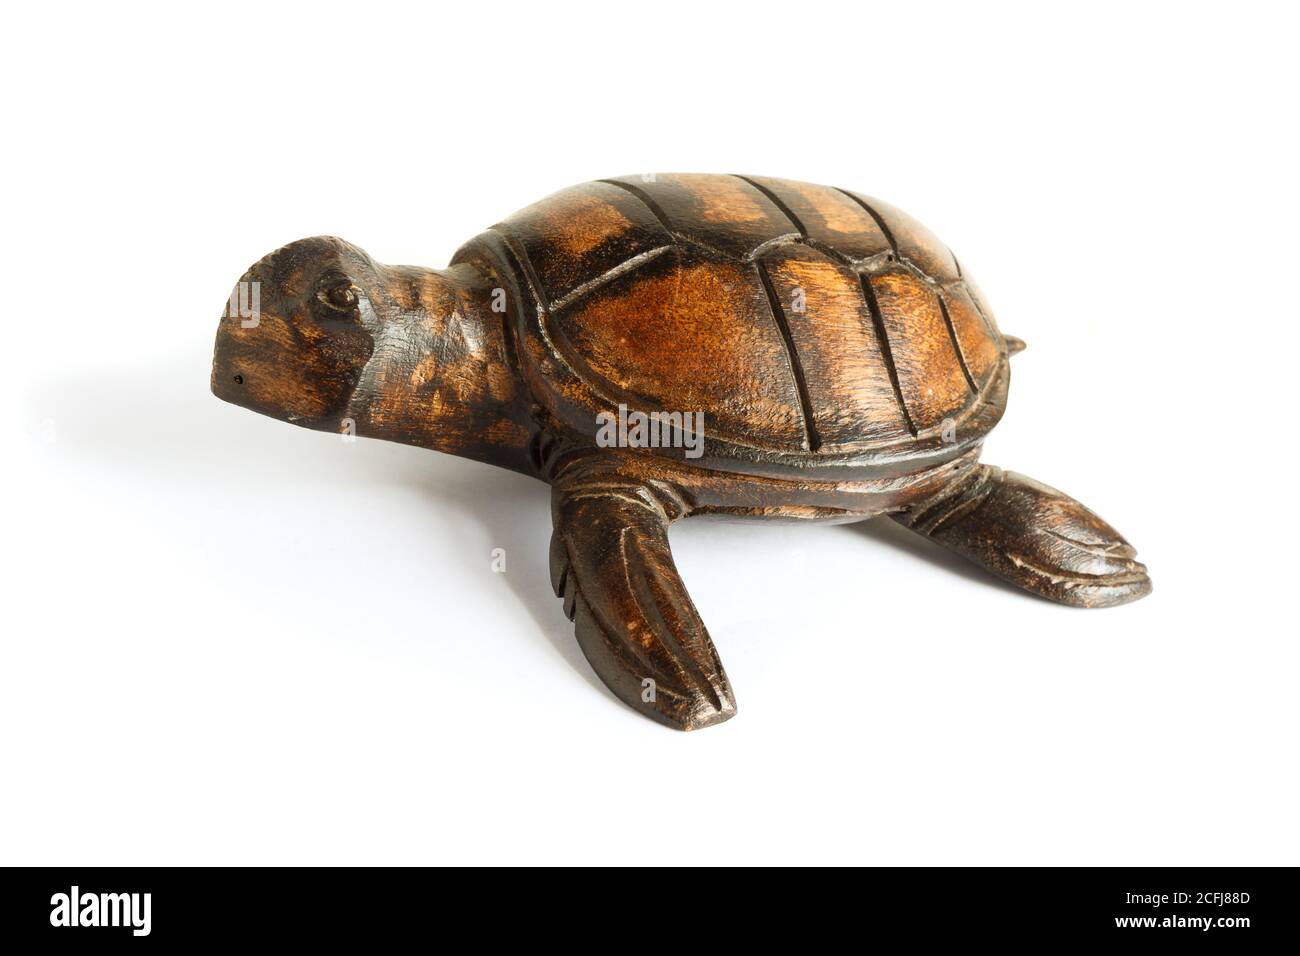 Wooden figurine of a sea turtle on a white background. Stock Photo